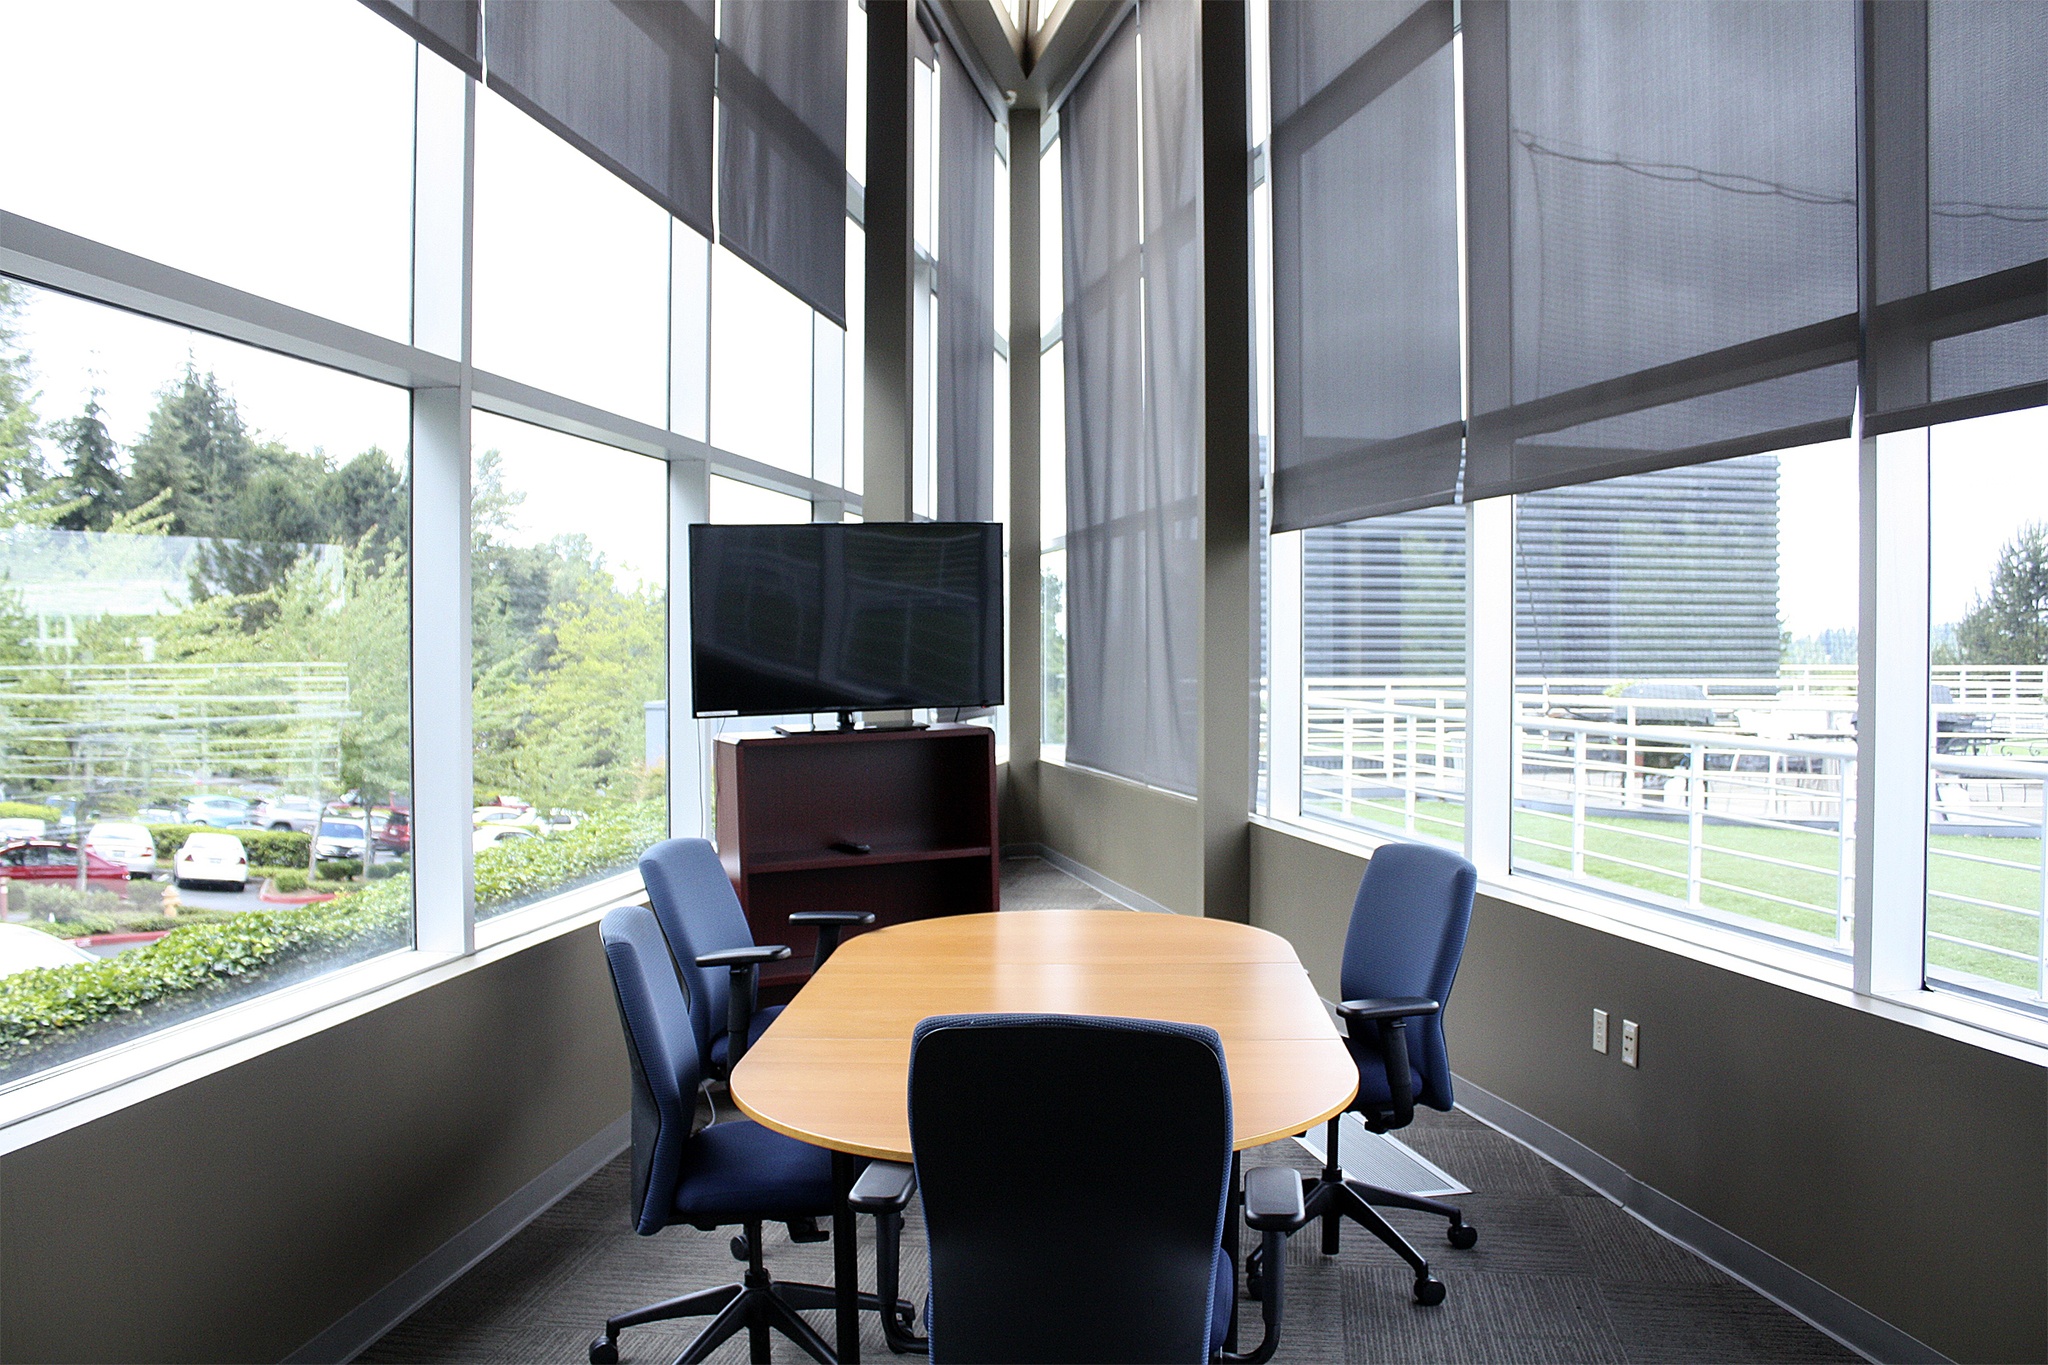 The "Atrium" conference room at Bellevue co-working startup extraSlice provides ample natural light at the Eastgate campus. An outdoor volleyball court and grilling area provide a comfortable environment for tenants.